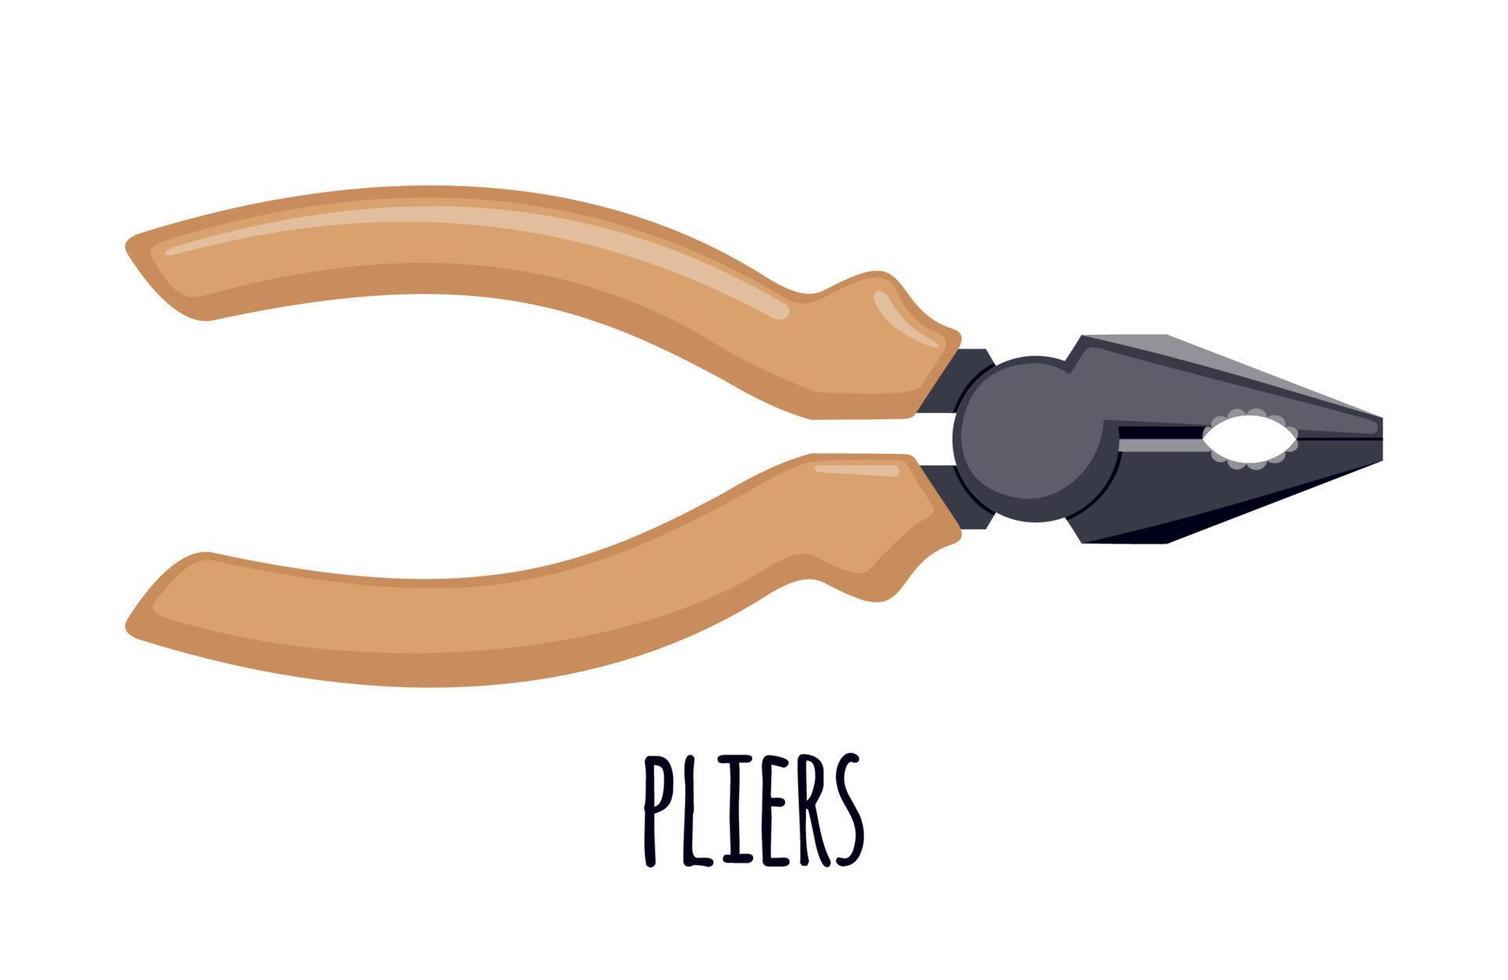 Cutting pliers icon in flat style isolated on white background. Carpenter tool. Vector illustration.